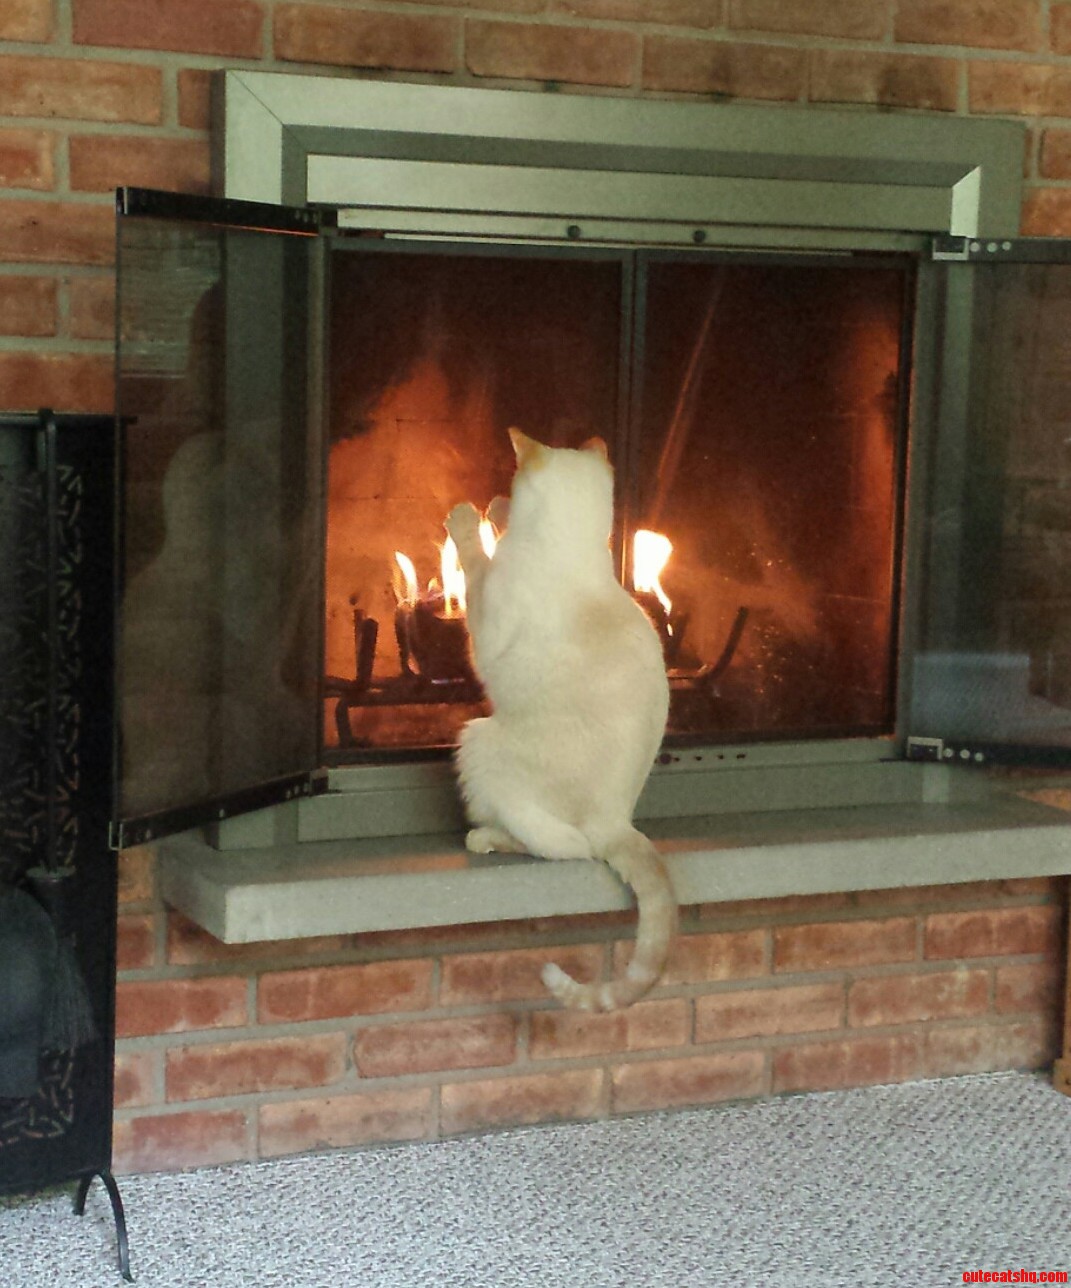 He loves the warmth.